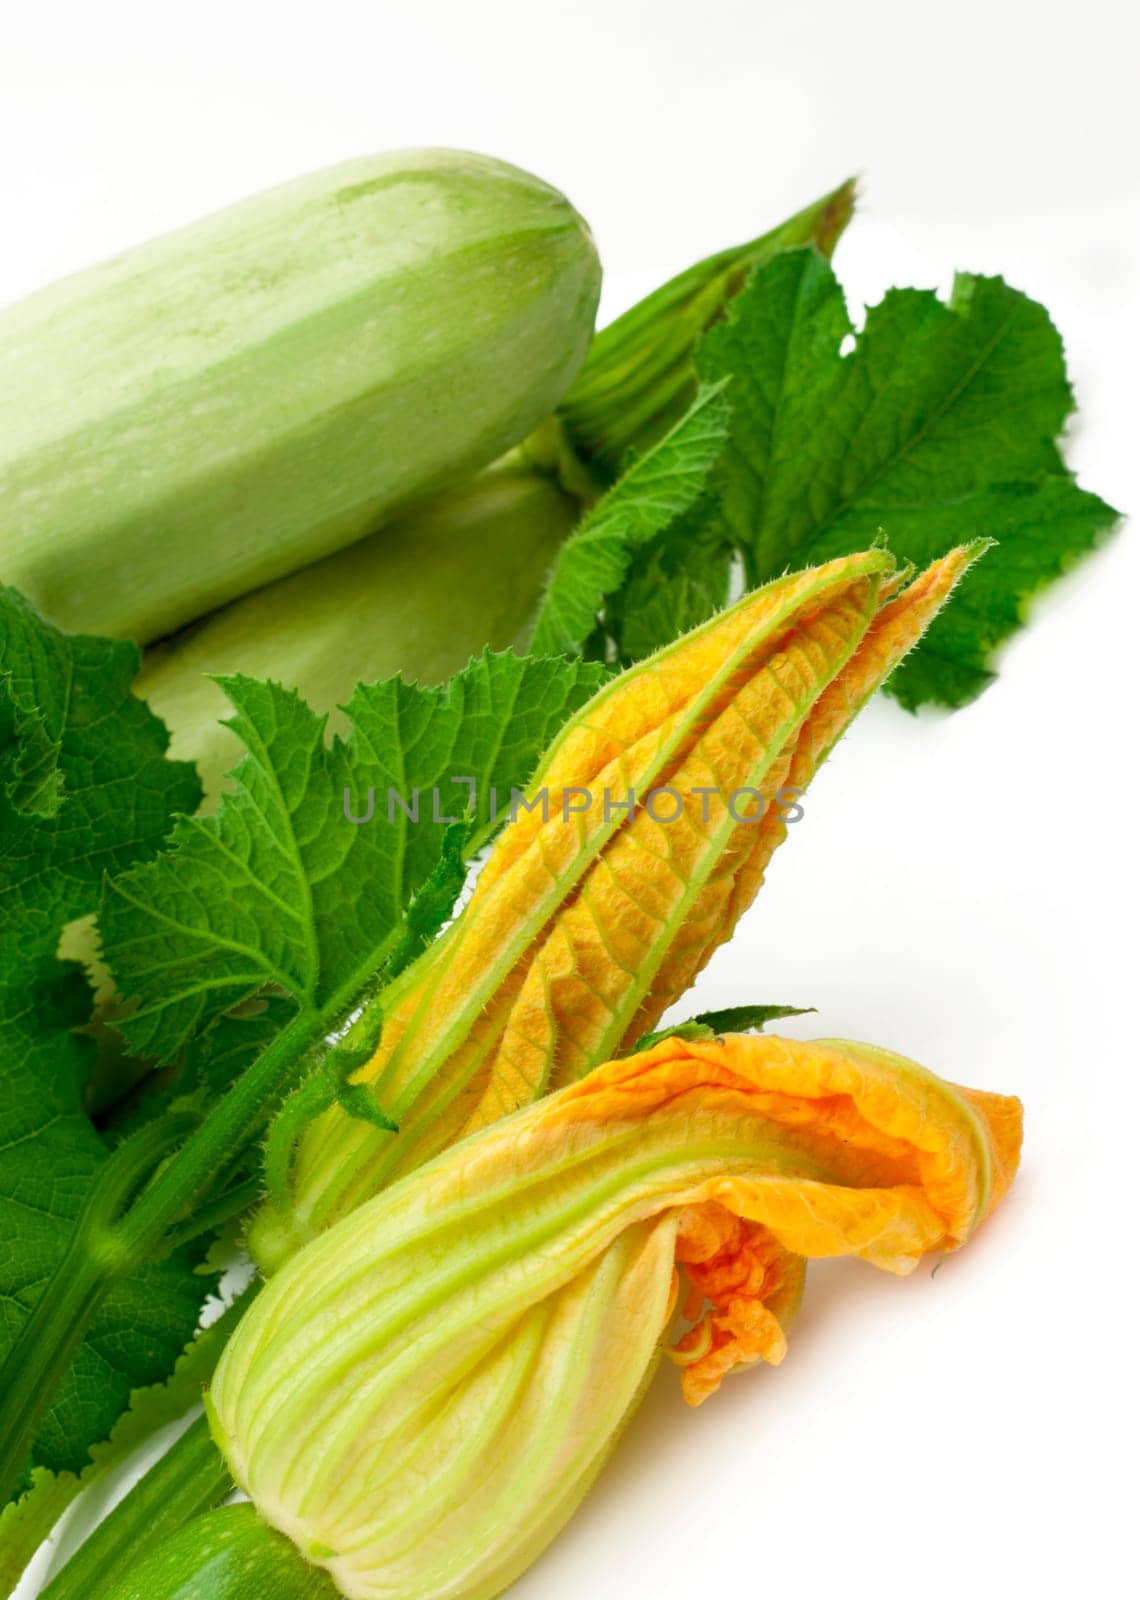 Fresh vegetable marrow with green leaf. Diet food, vegetarianism. Flowers, leaves and fruits of young green zucchini isolated on white background by aprilphoto